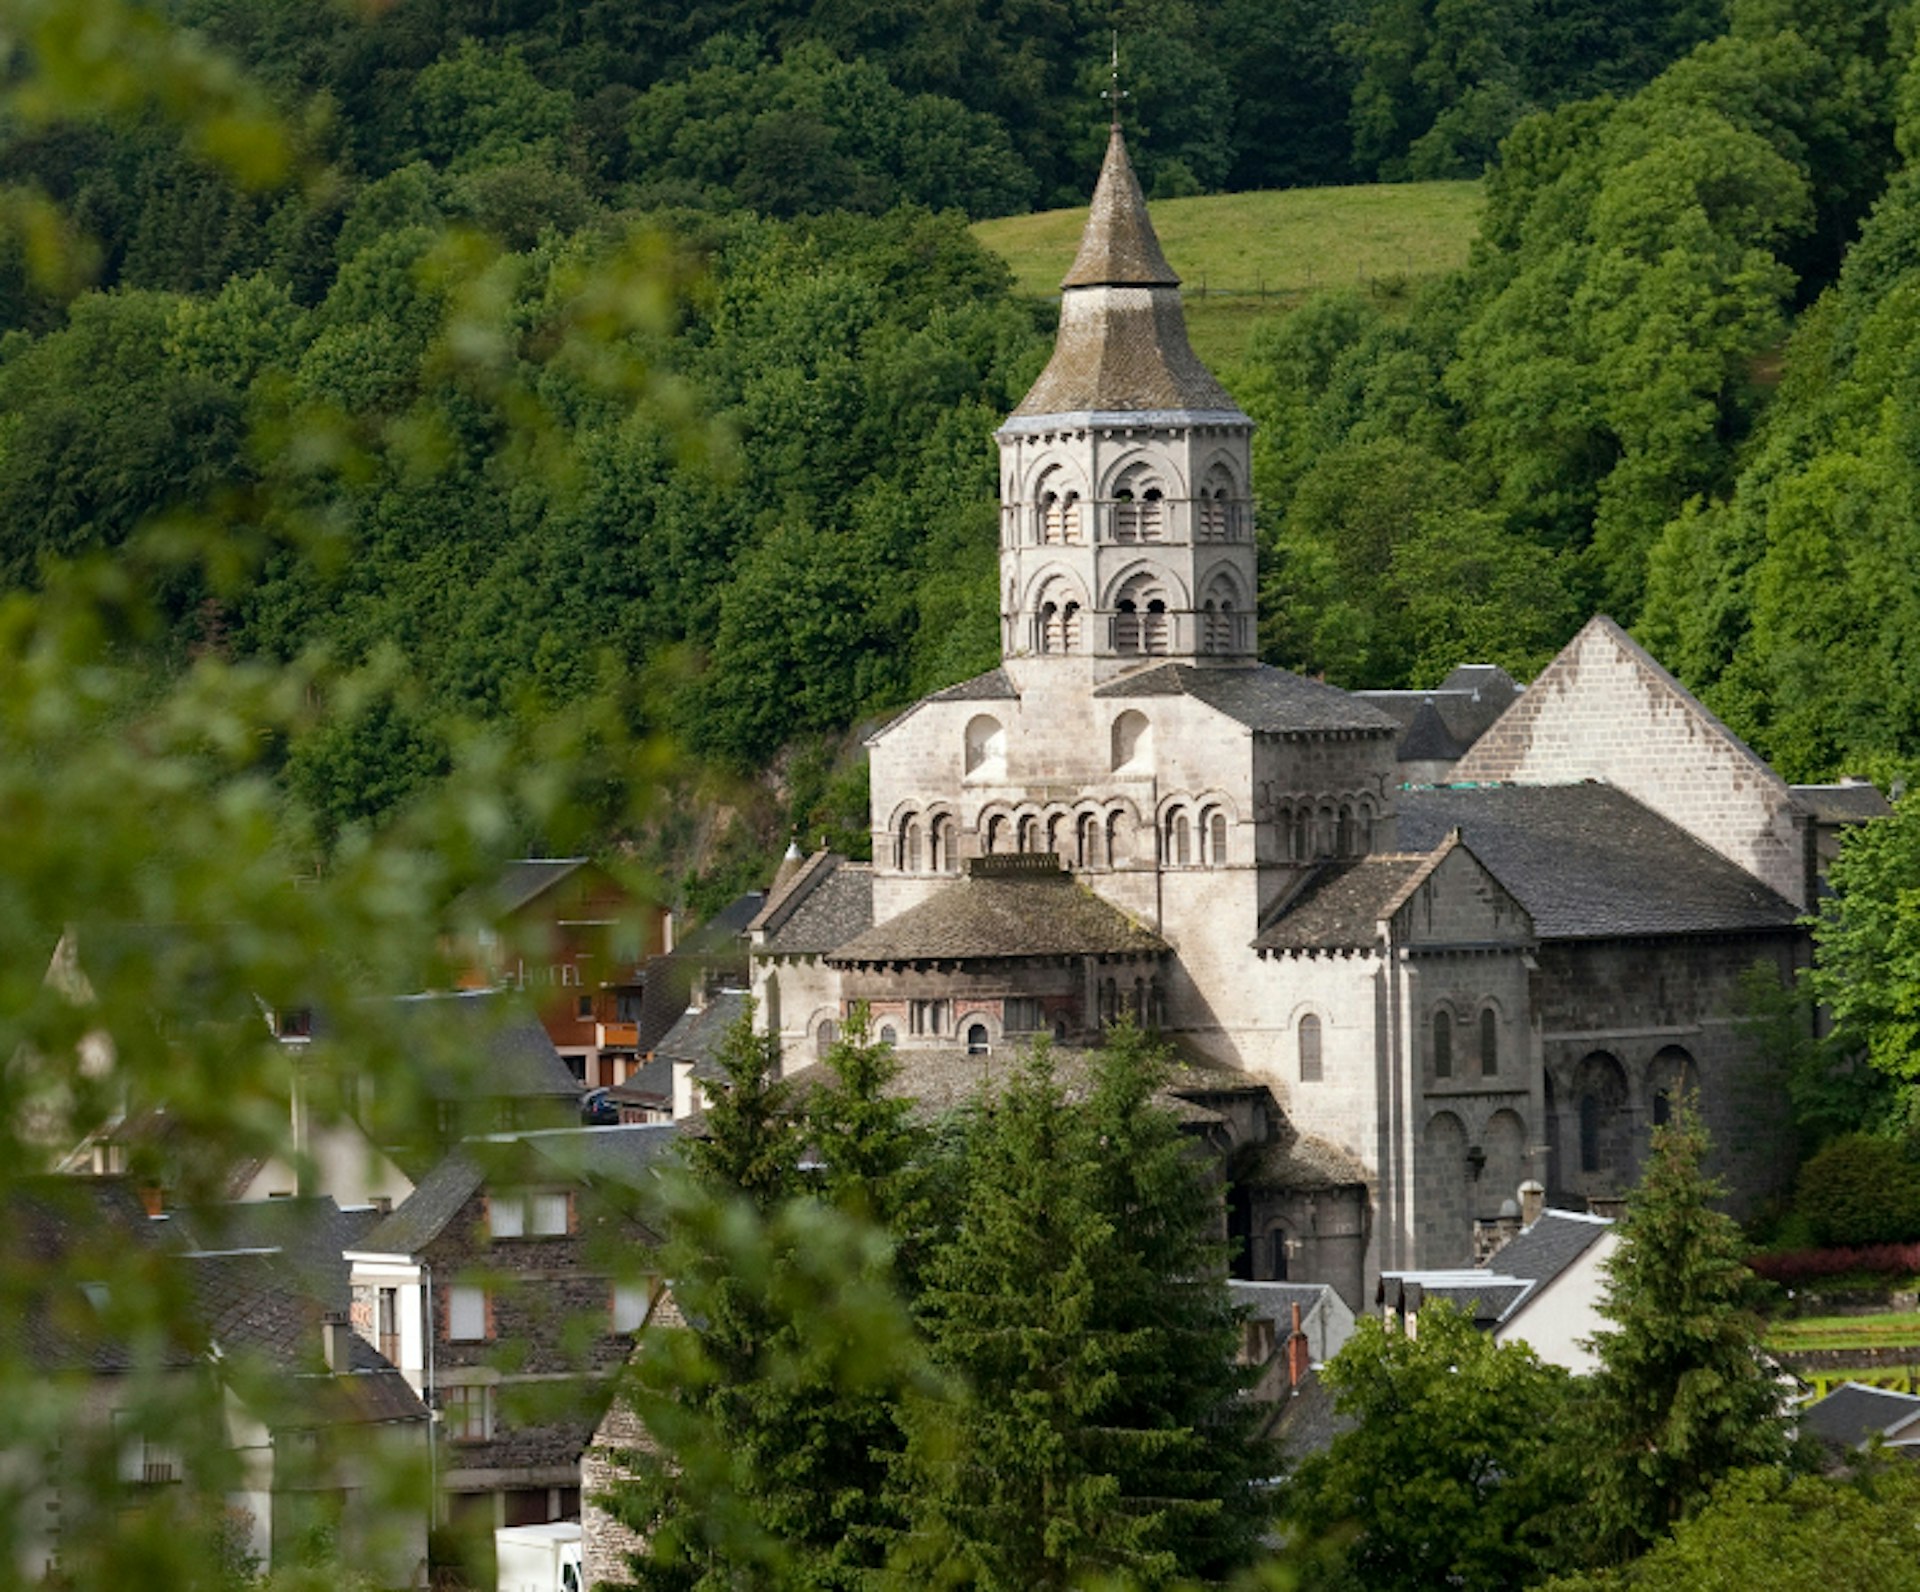 <span class="caption">The Romanesque Basilique Notre Dame dominates the tiny town of Orcival. Image by Cultura RM/Philip Lee Harvey/Photostock Getty</span>